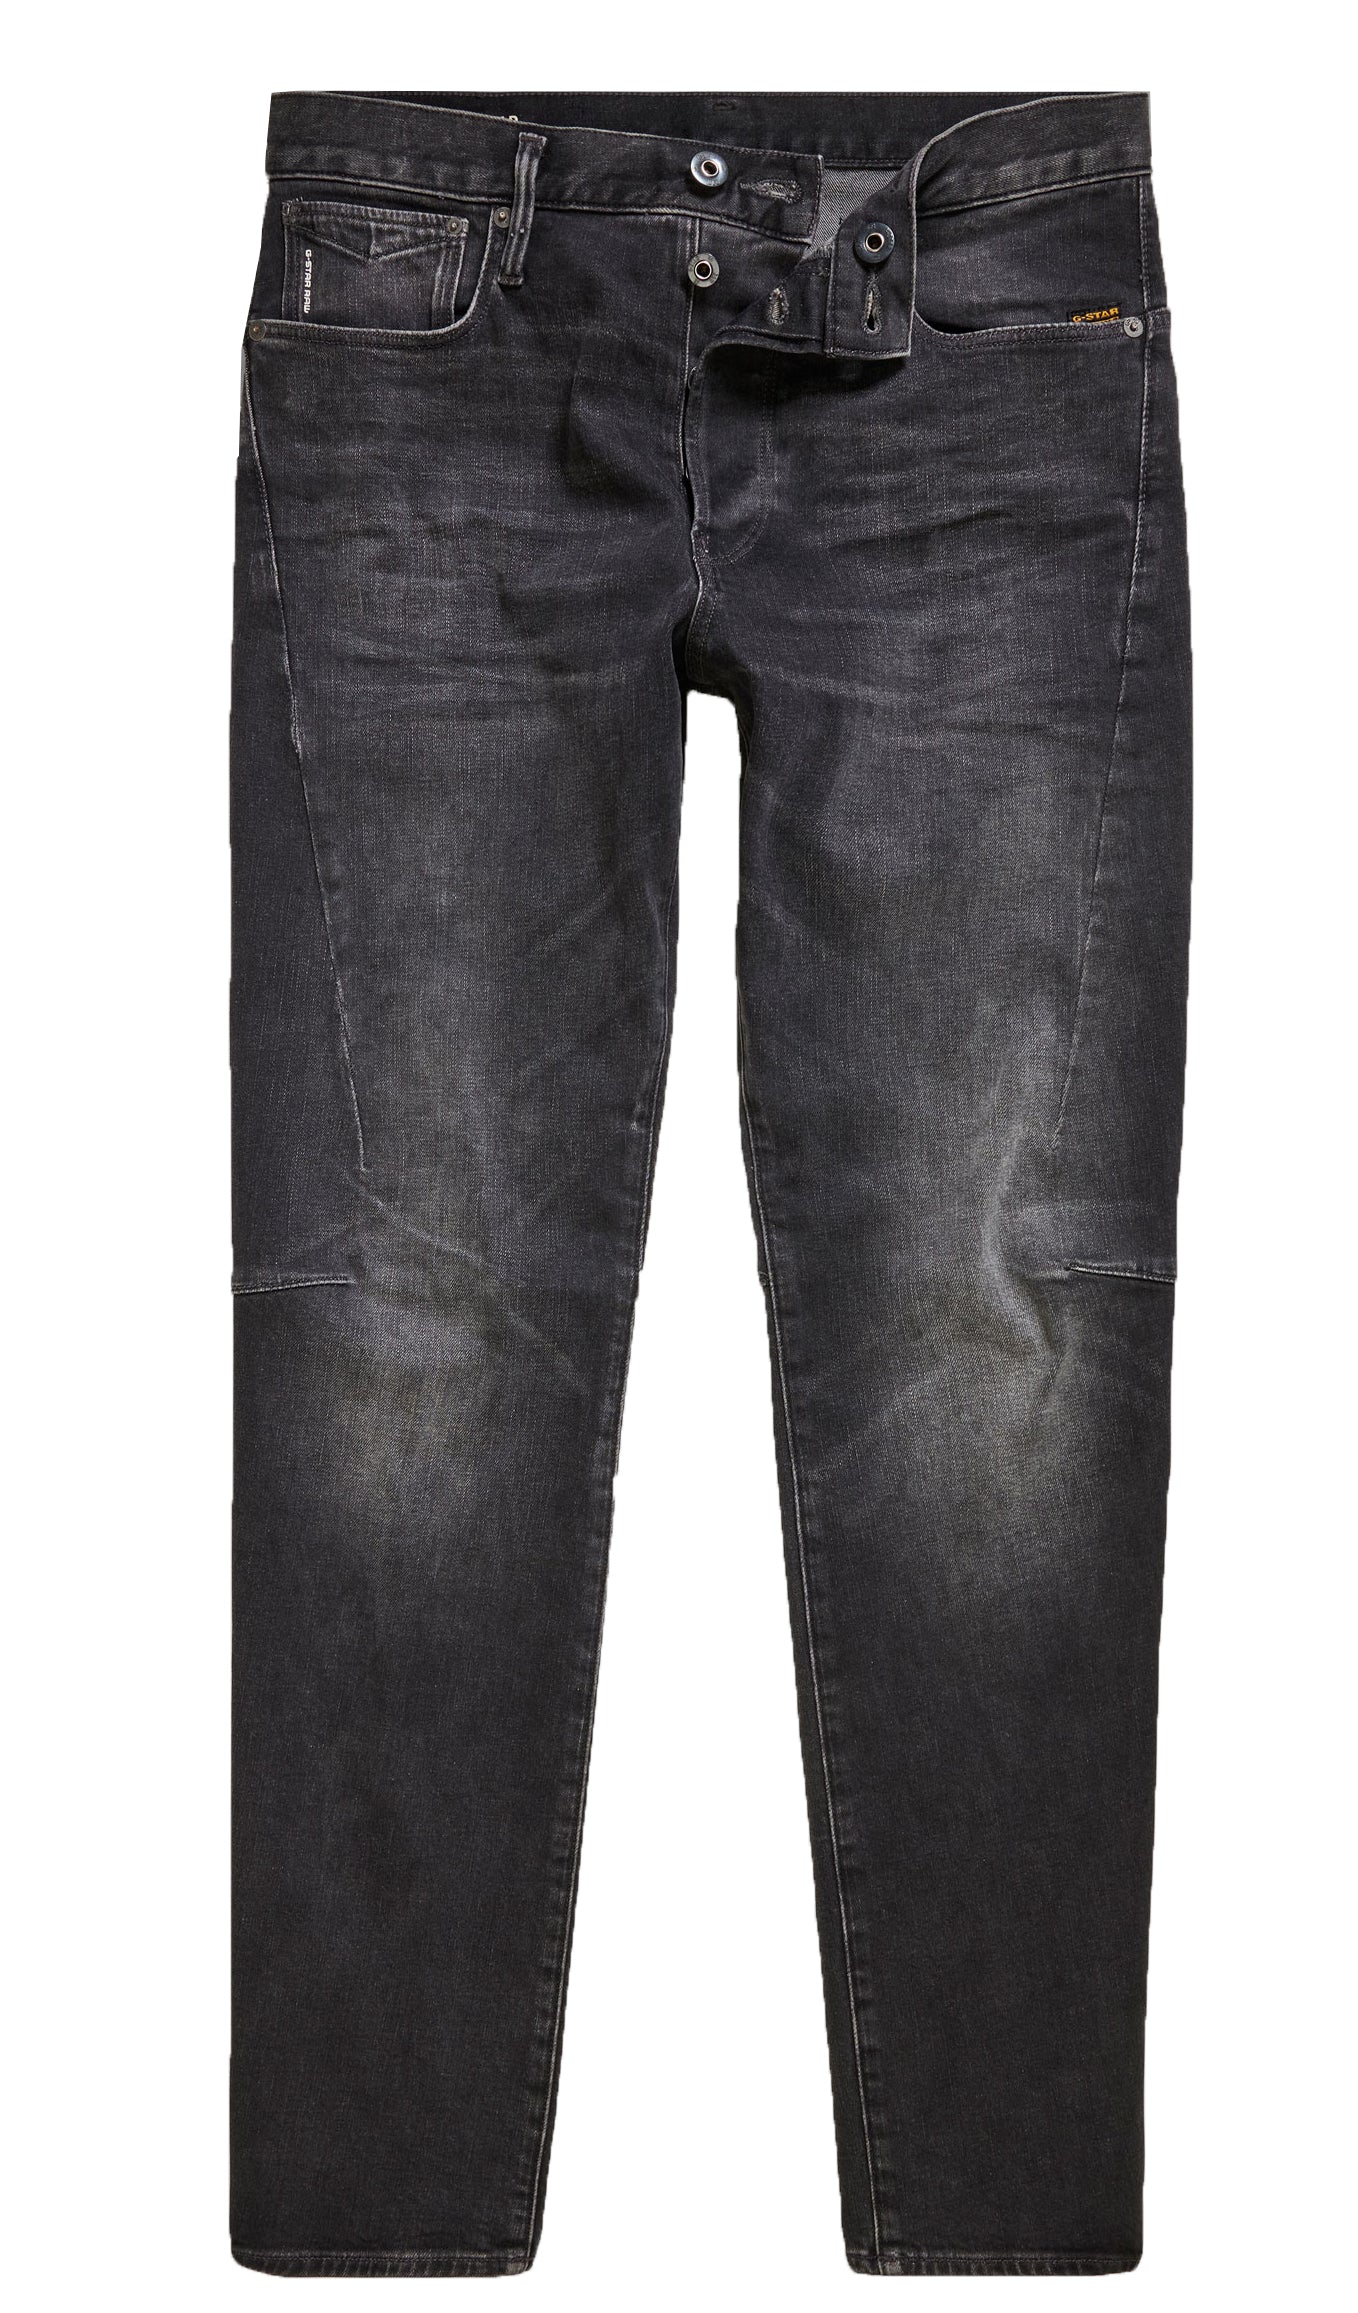     Founded on the philosophy “Just the product”, G-star RAW has become a leader in the denim industry. The brand is known for crafting distinct, textured pieces with soul.      Gender: Men's     Style# 51010-A634-A592     Revend Skinny Denim     Color: Med Aged Faded